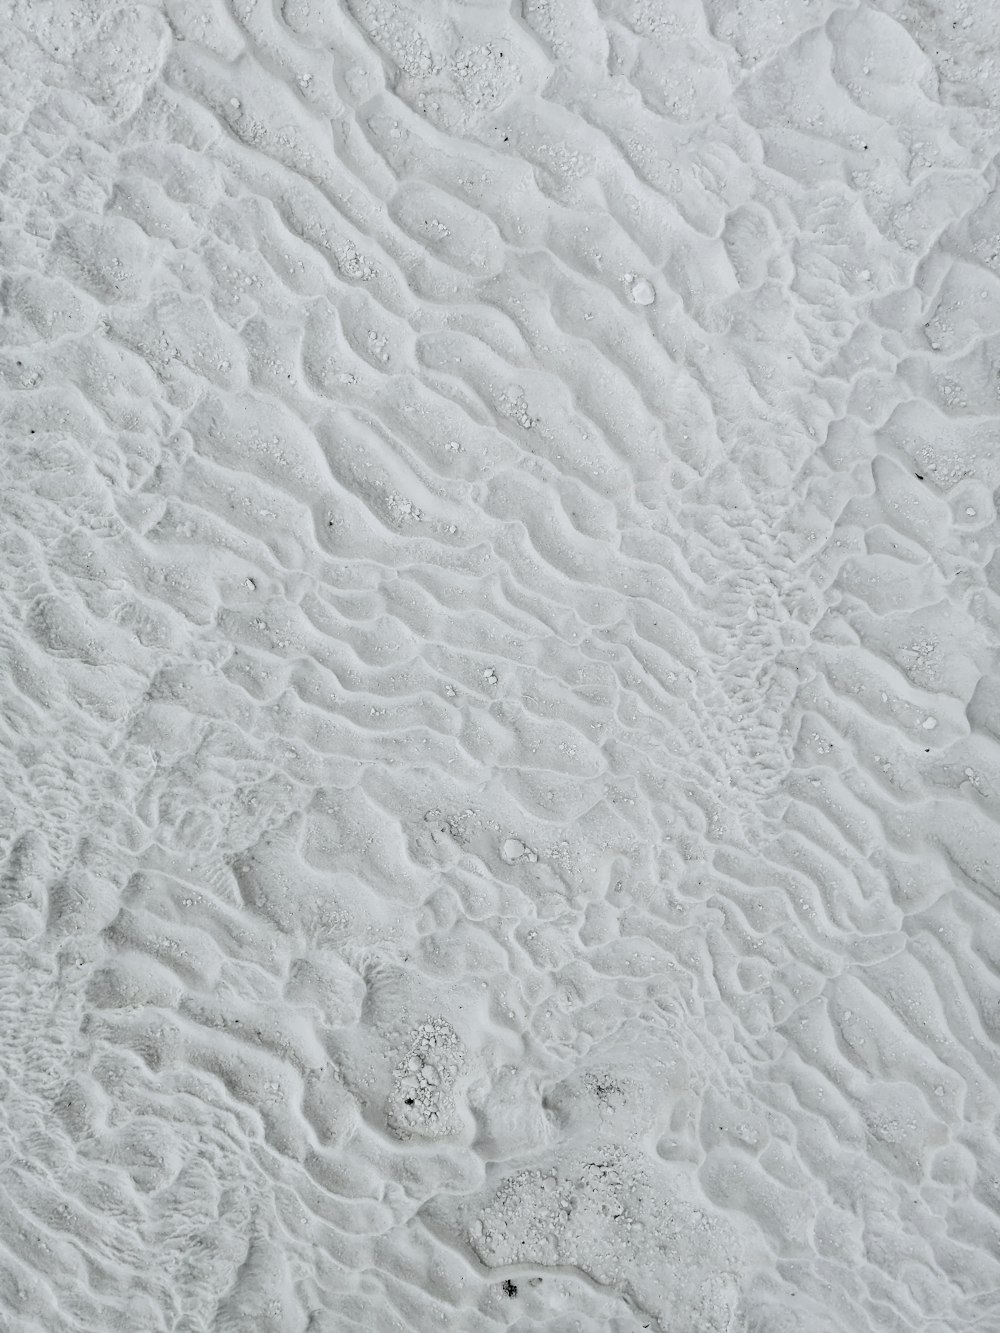 white sand with water droplets